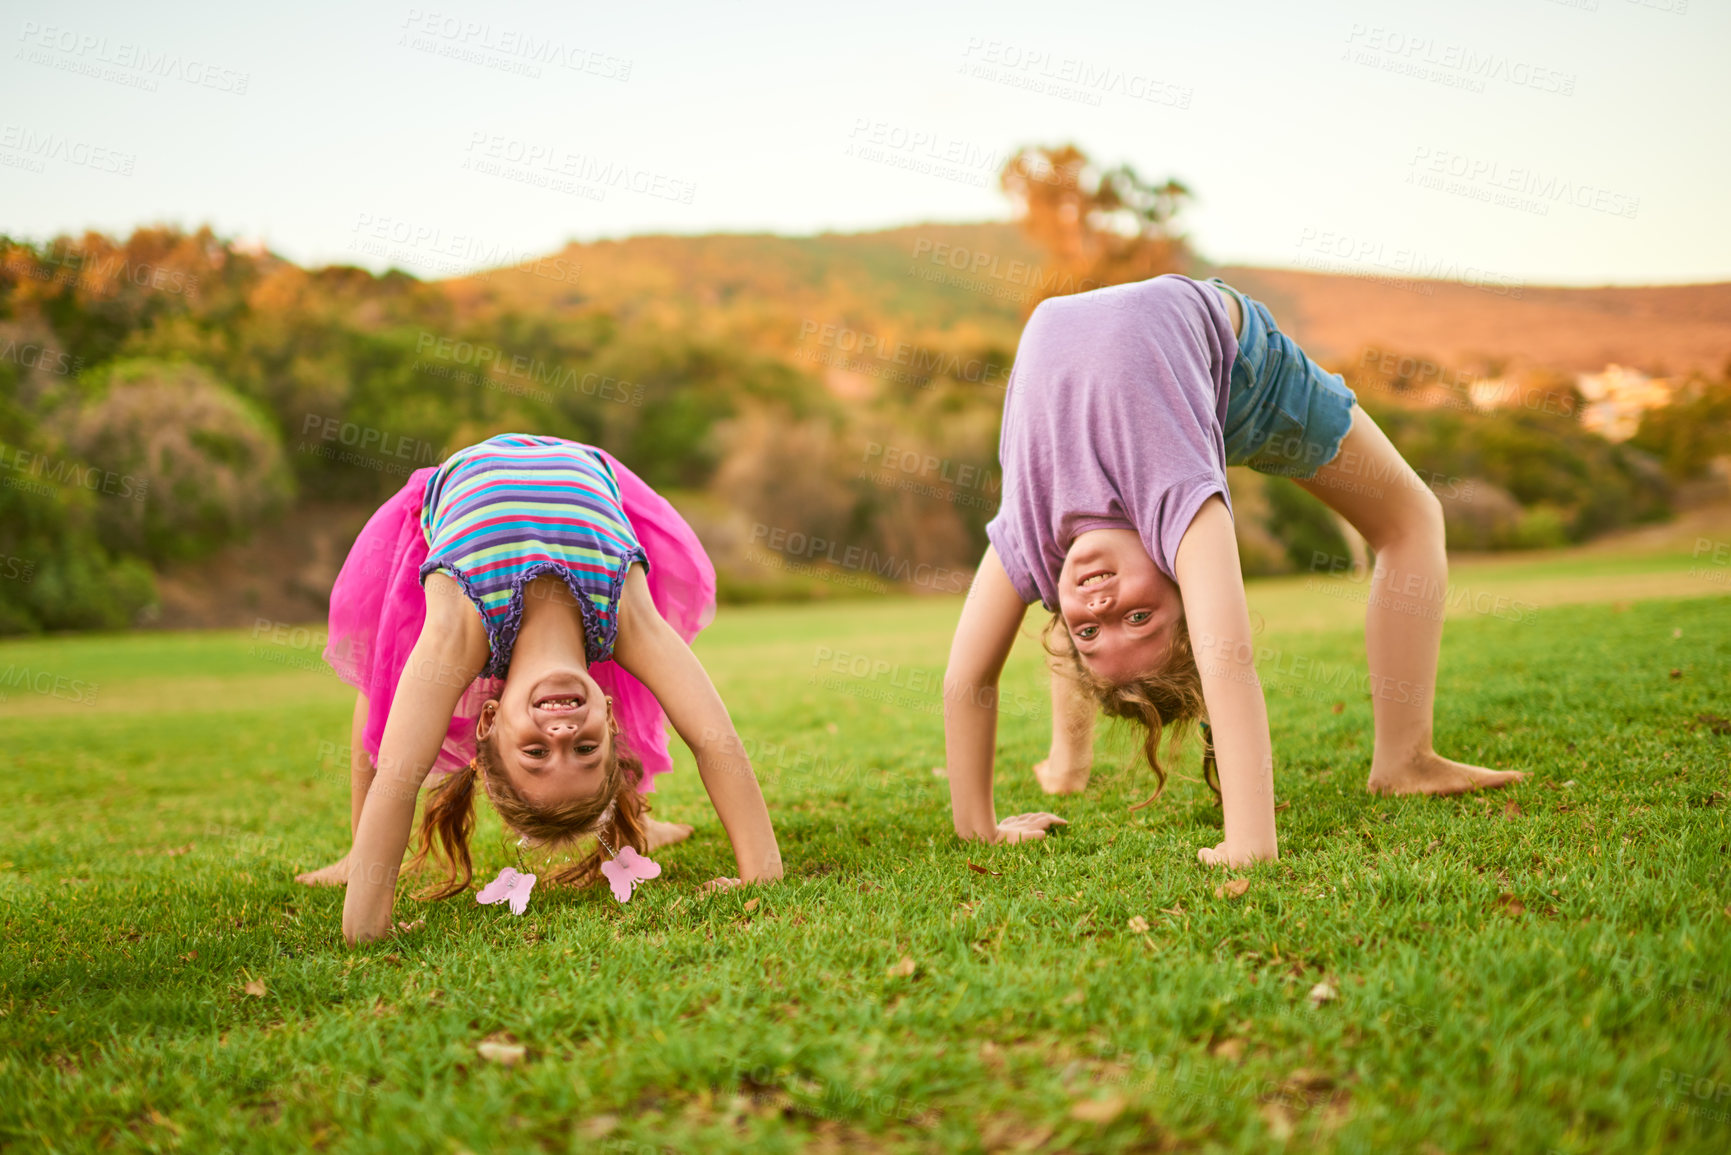 Buy stock photo Portrait of two little girls doing handstands on the grass outdoors